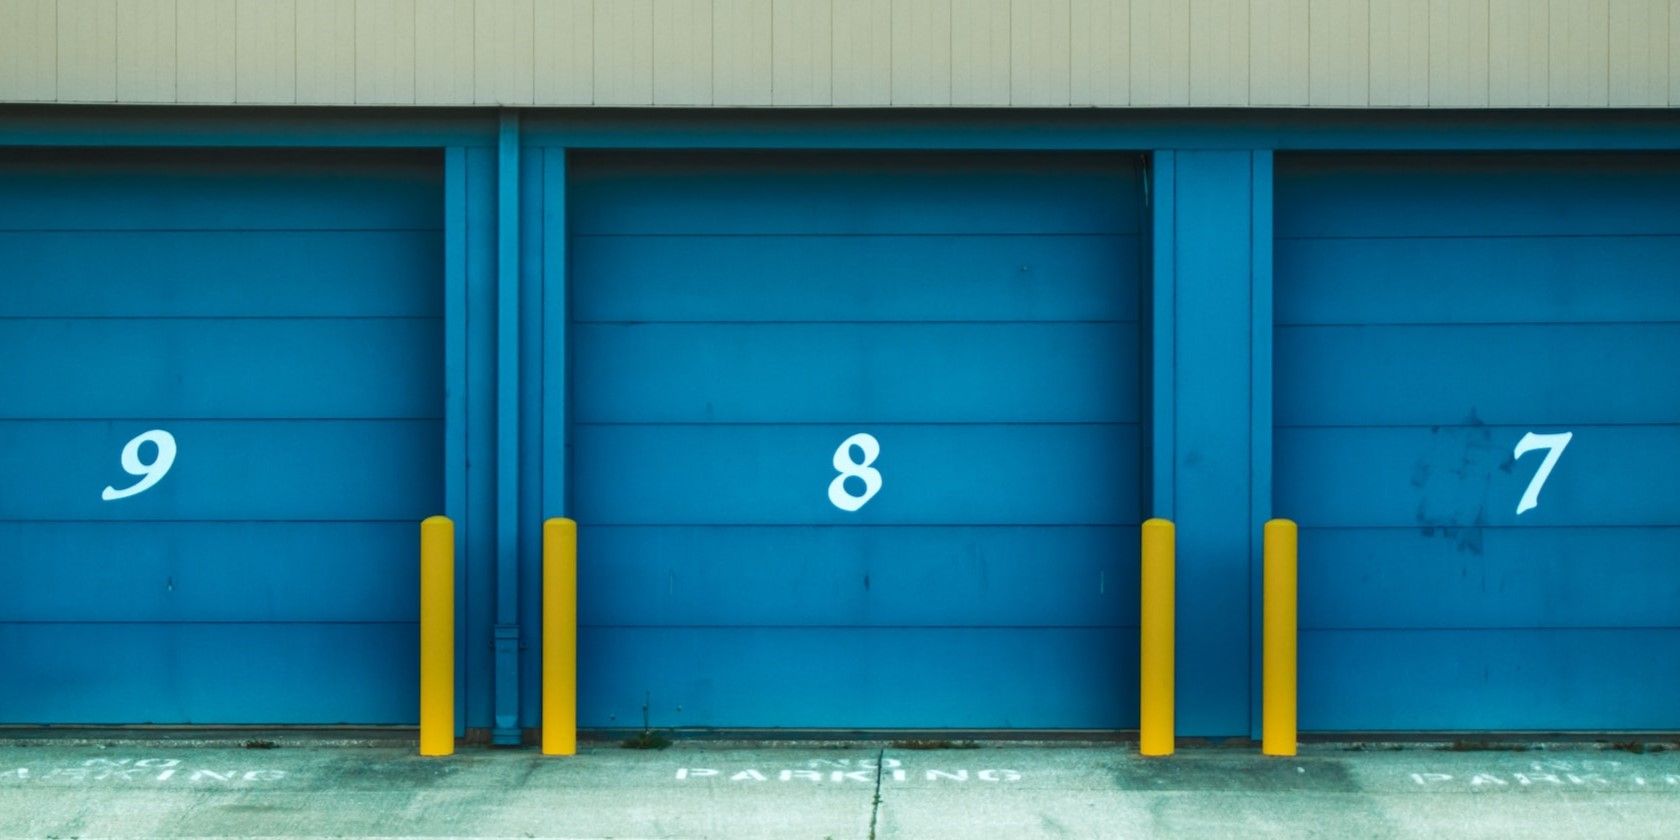 3 numbered storage containers with blue roller shutter doors